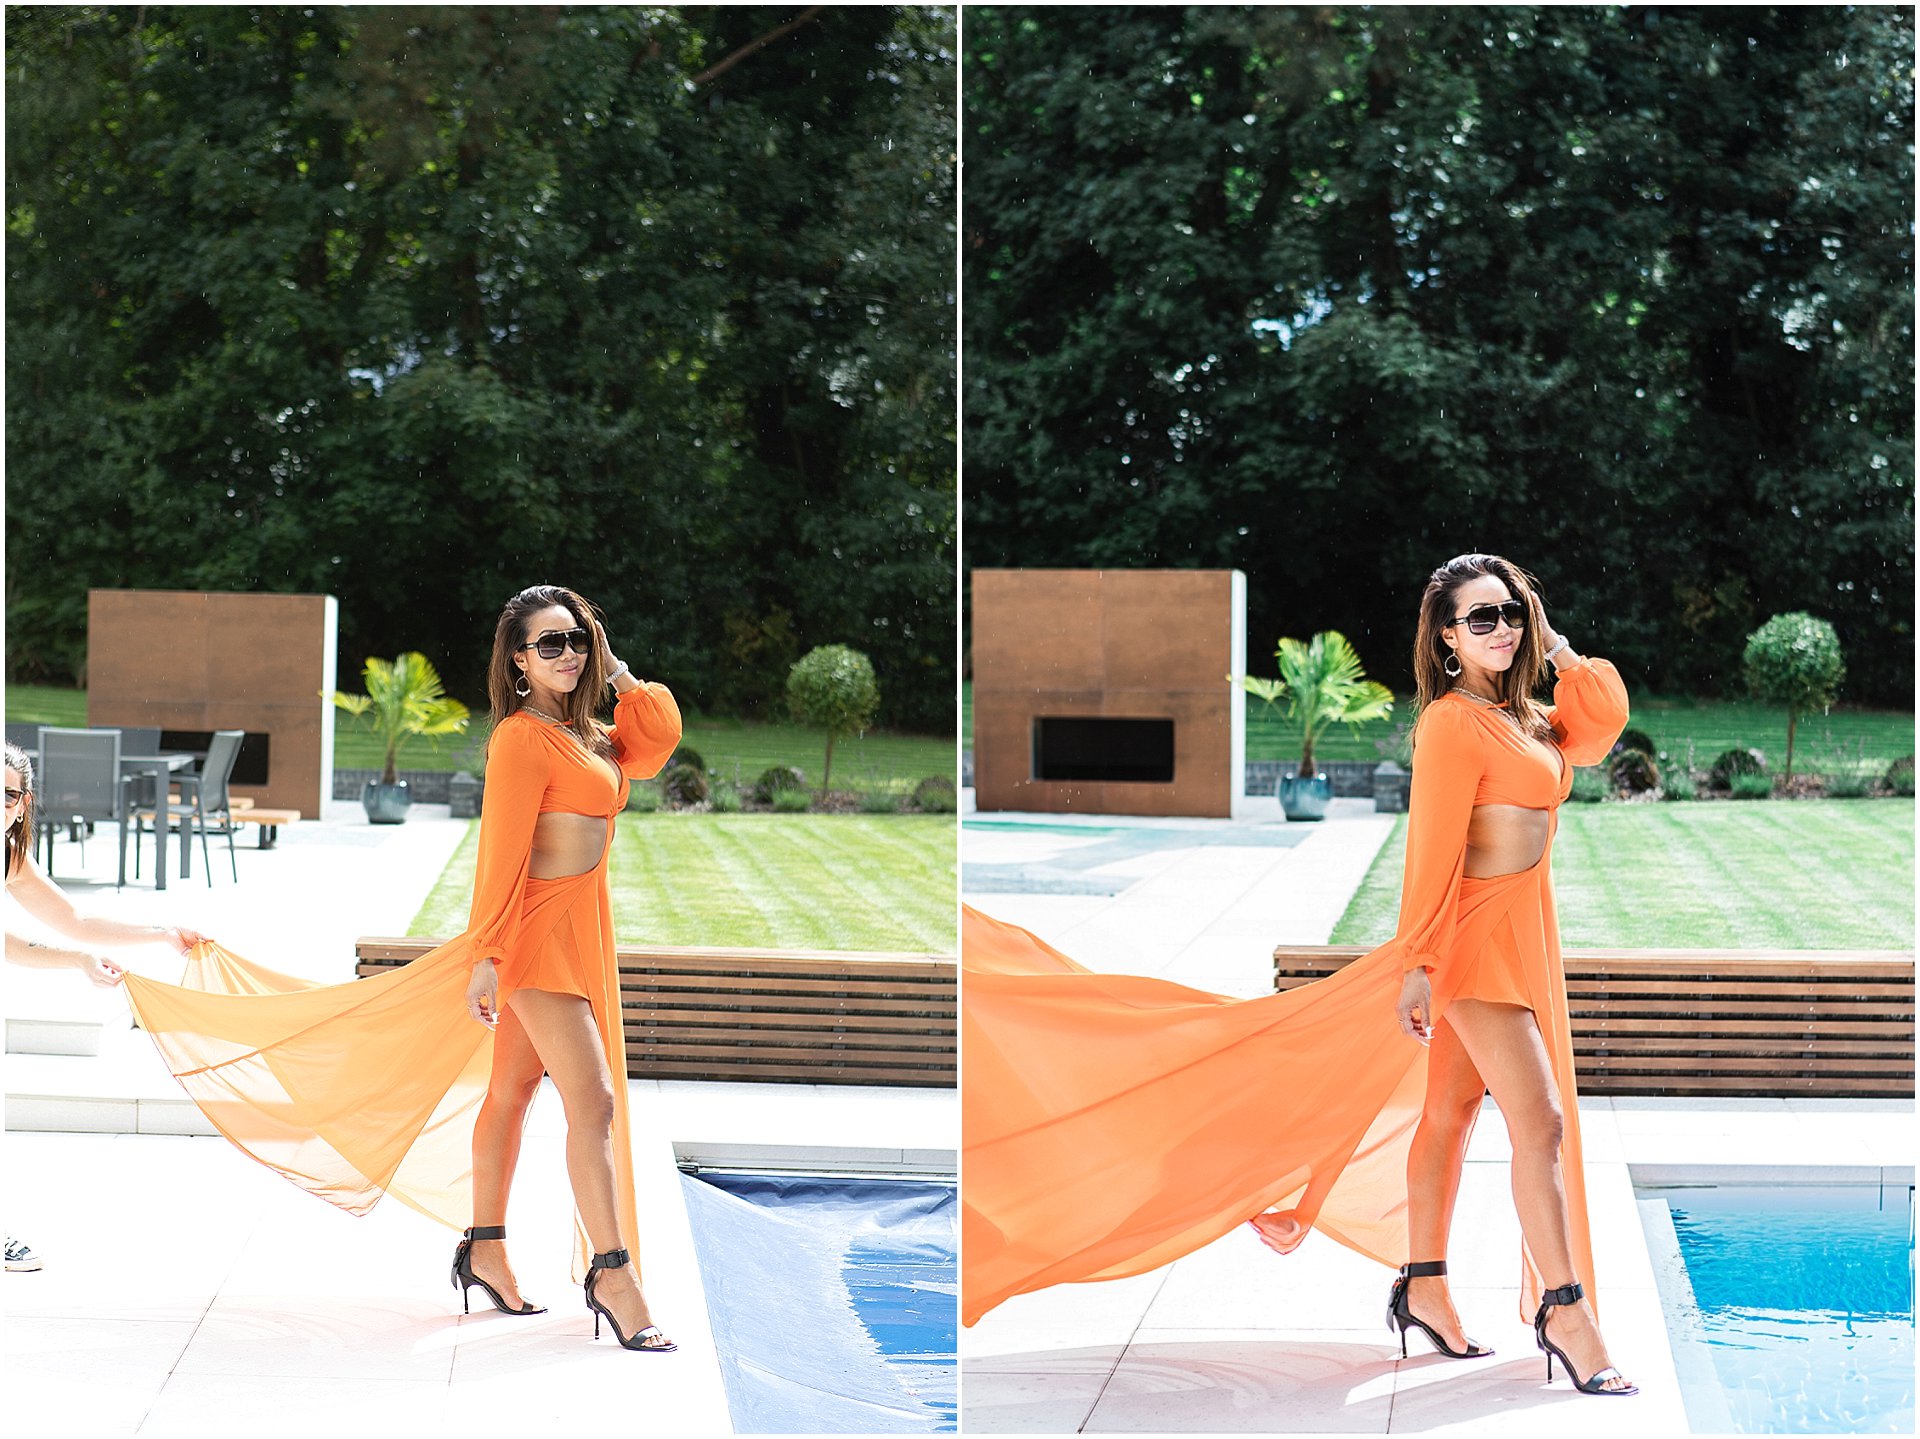 An example of using AI in your brand photography business, photoshopAI has removed the furniture in the background, added volume to the skirt and added pool water to the pool. Images by AKP Branding Stories